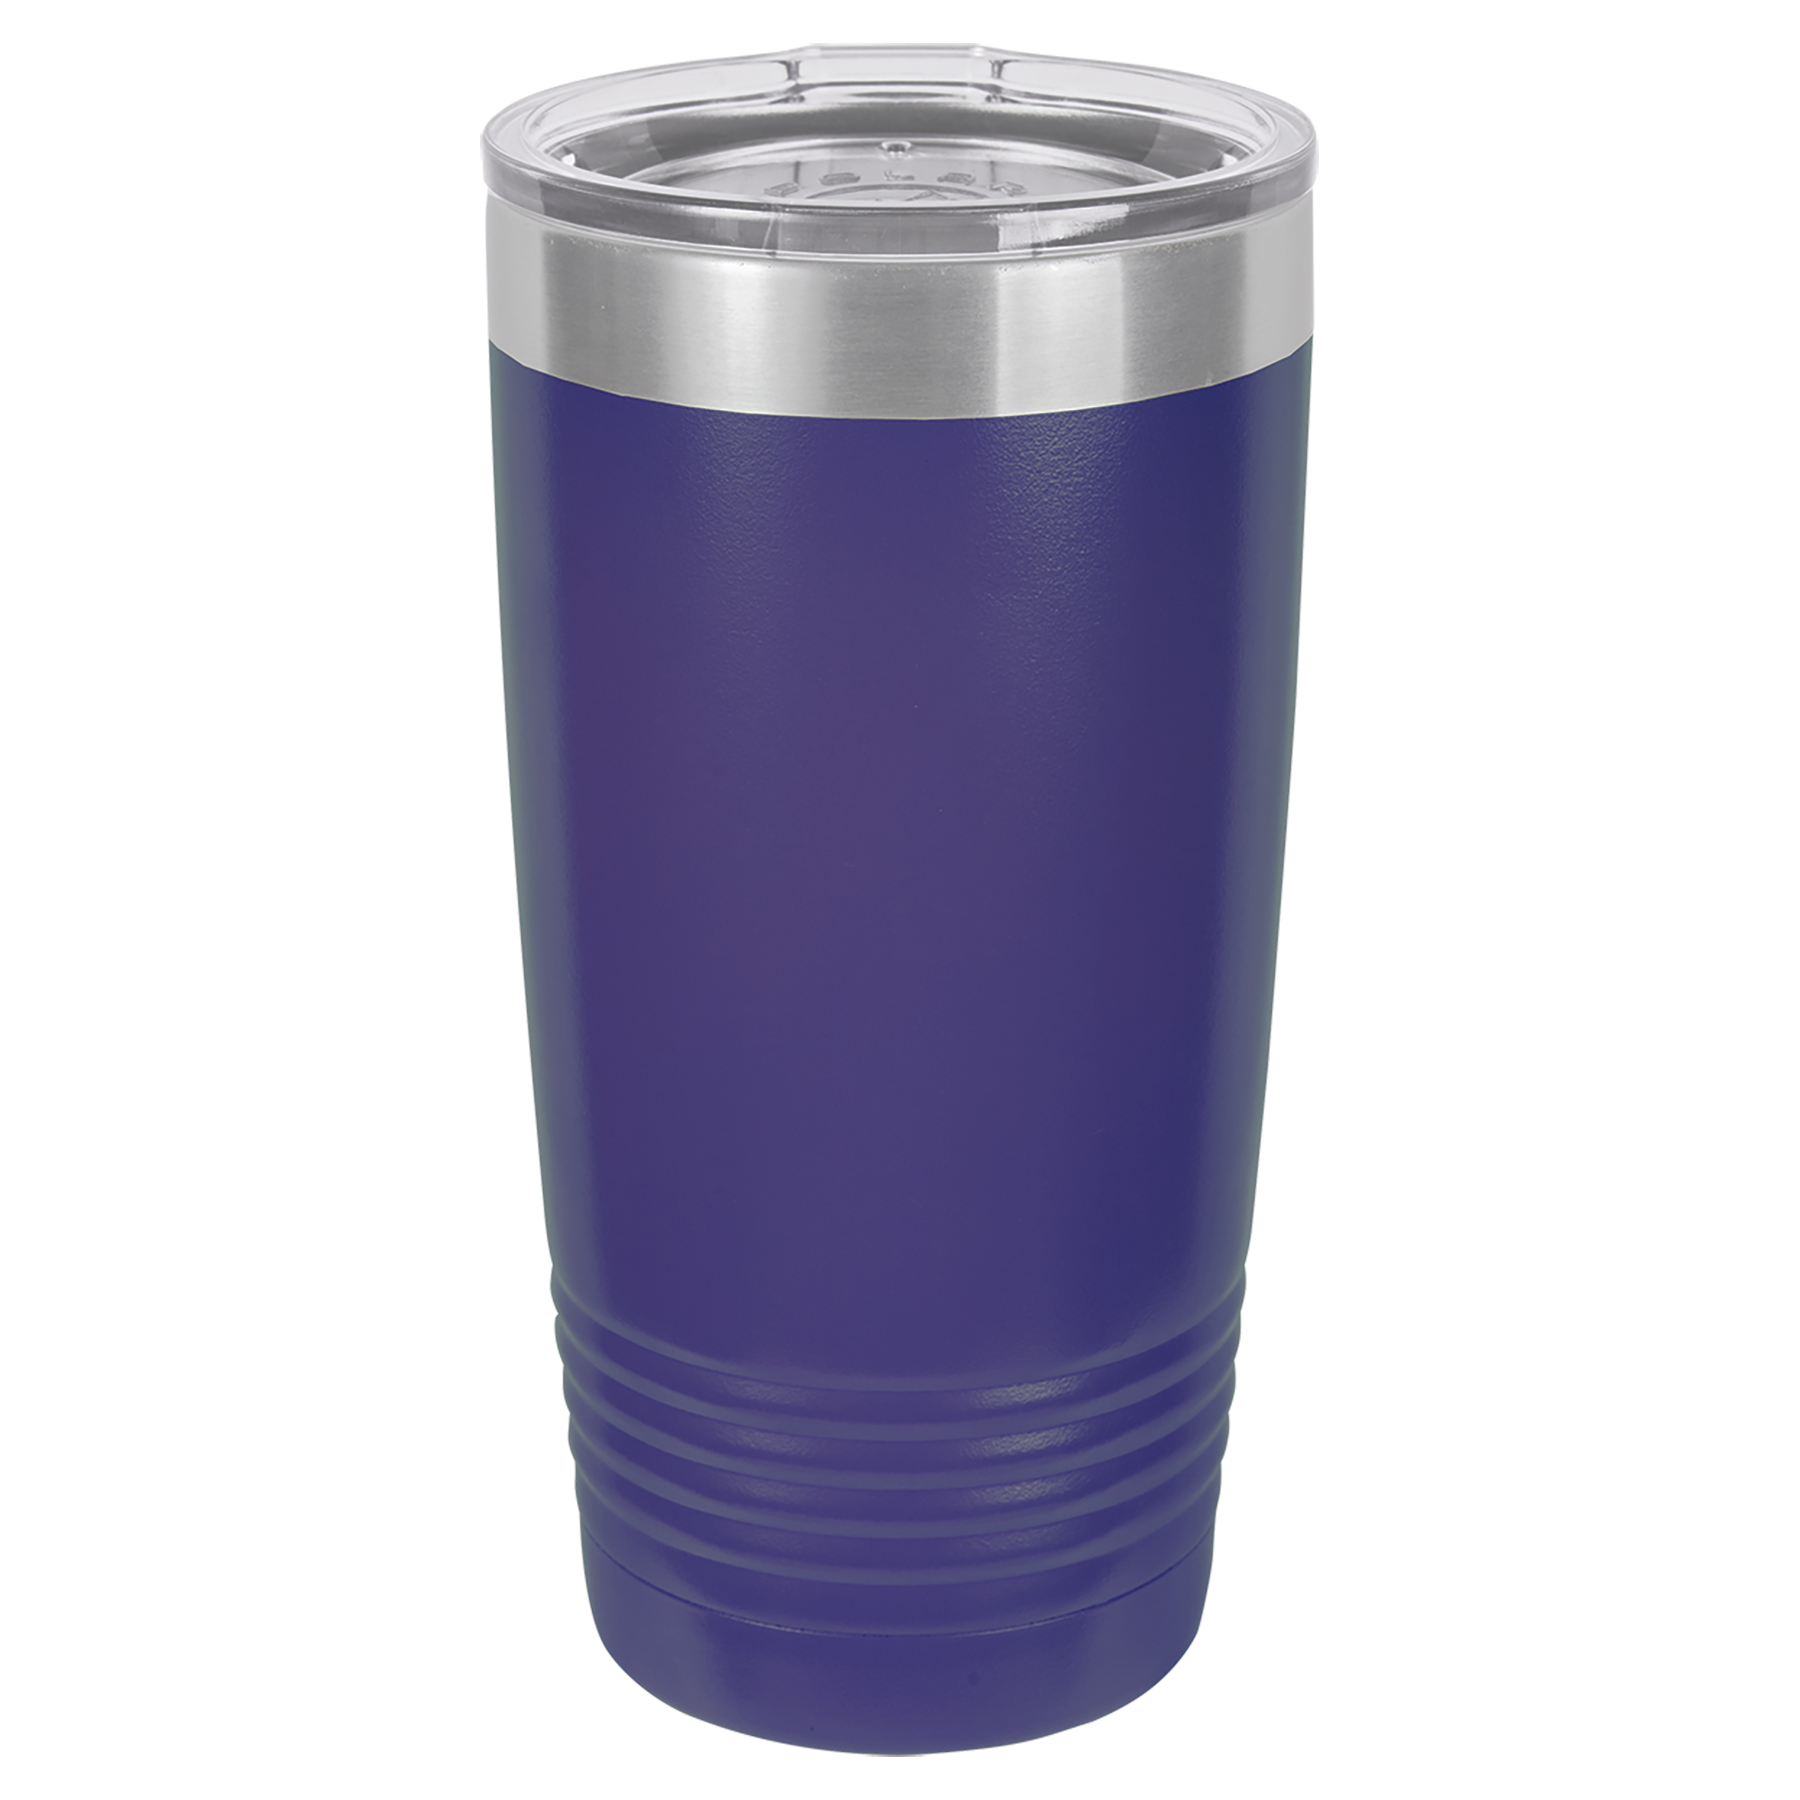 LSU 2020 CFP CHAMPIONS 20oz POLAR CAMEL DOUBLE WALL INSULATED TUMBLER CUP PURPLE 